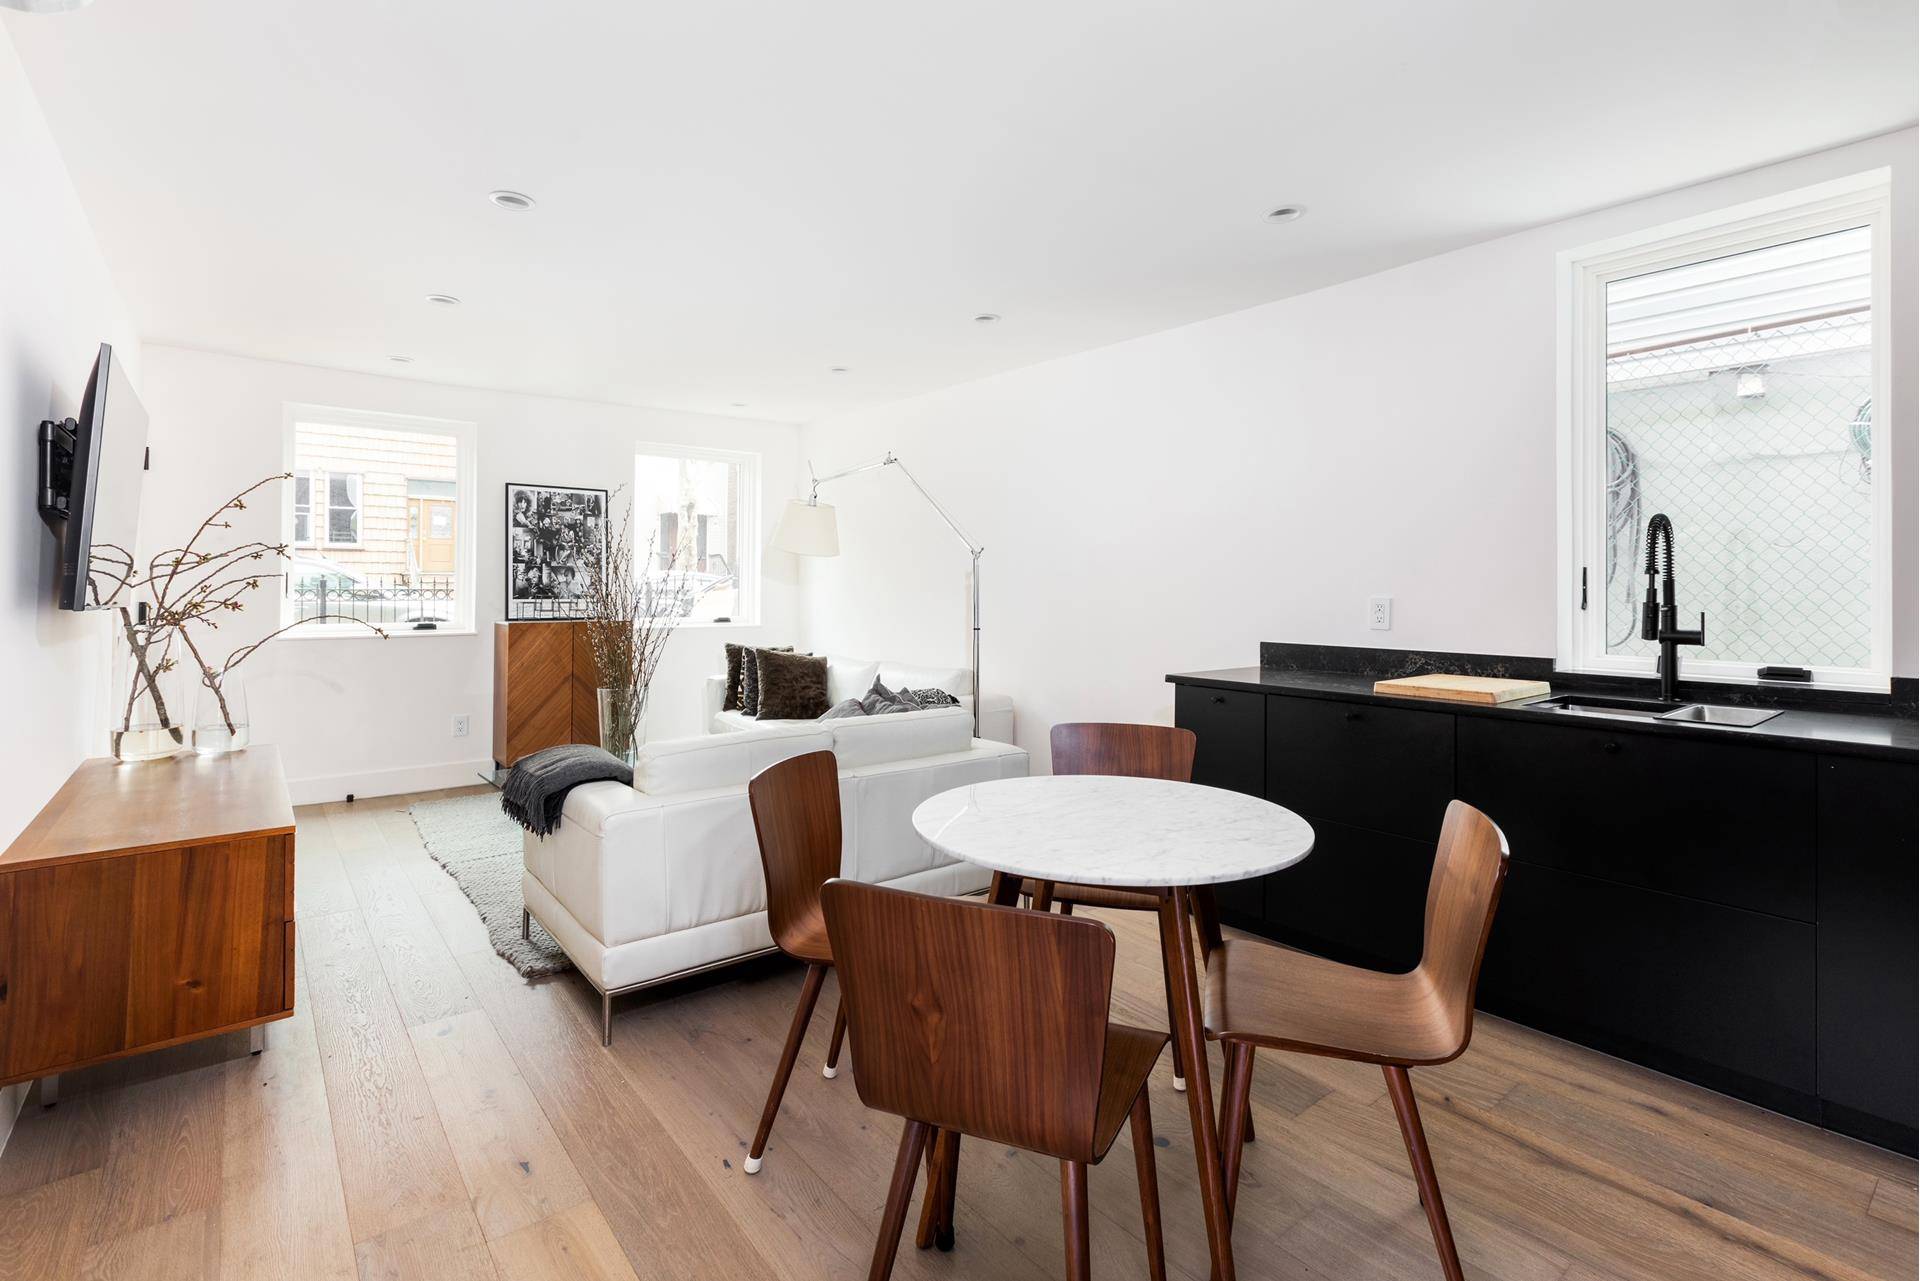 Stunning and stylish newly renovated 2 bedroom apartmentUpdated to perfection with deesigner finishes filling the space.